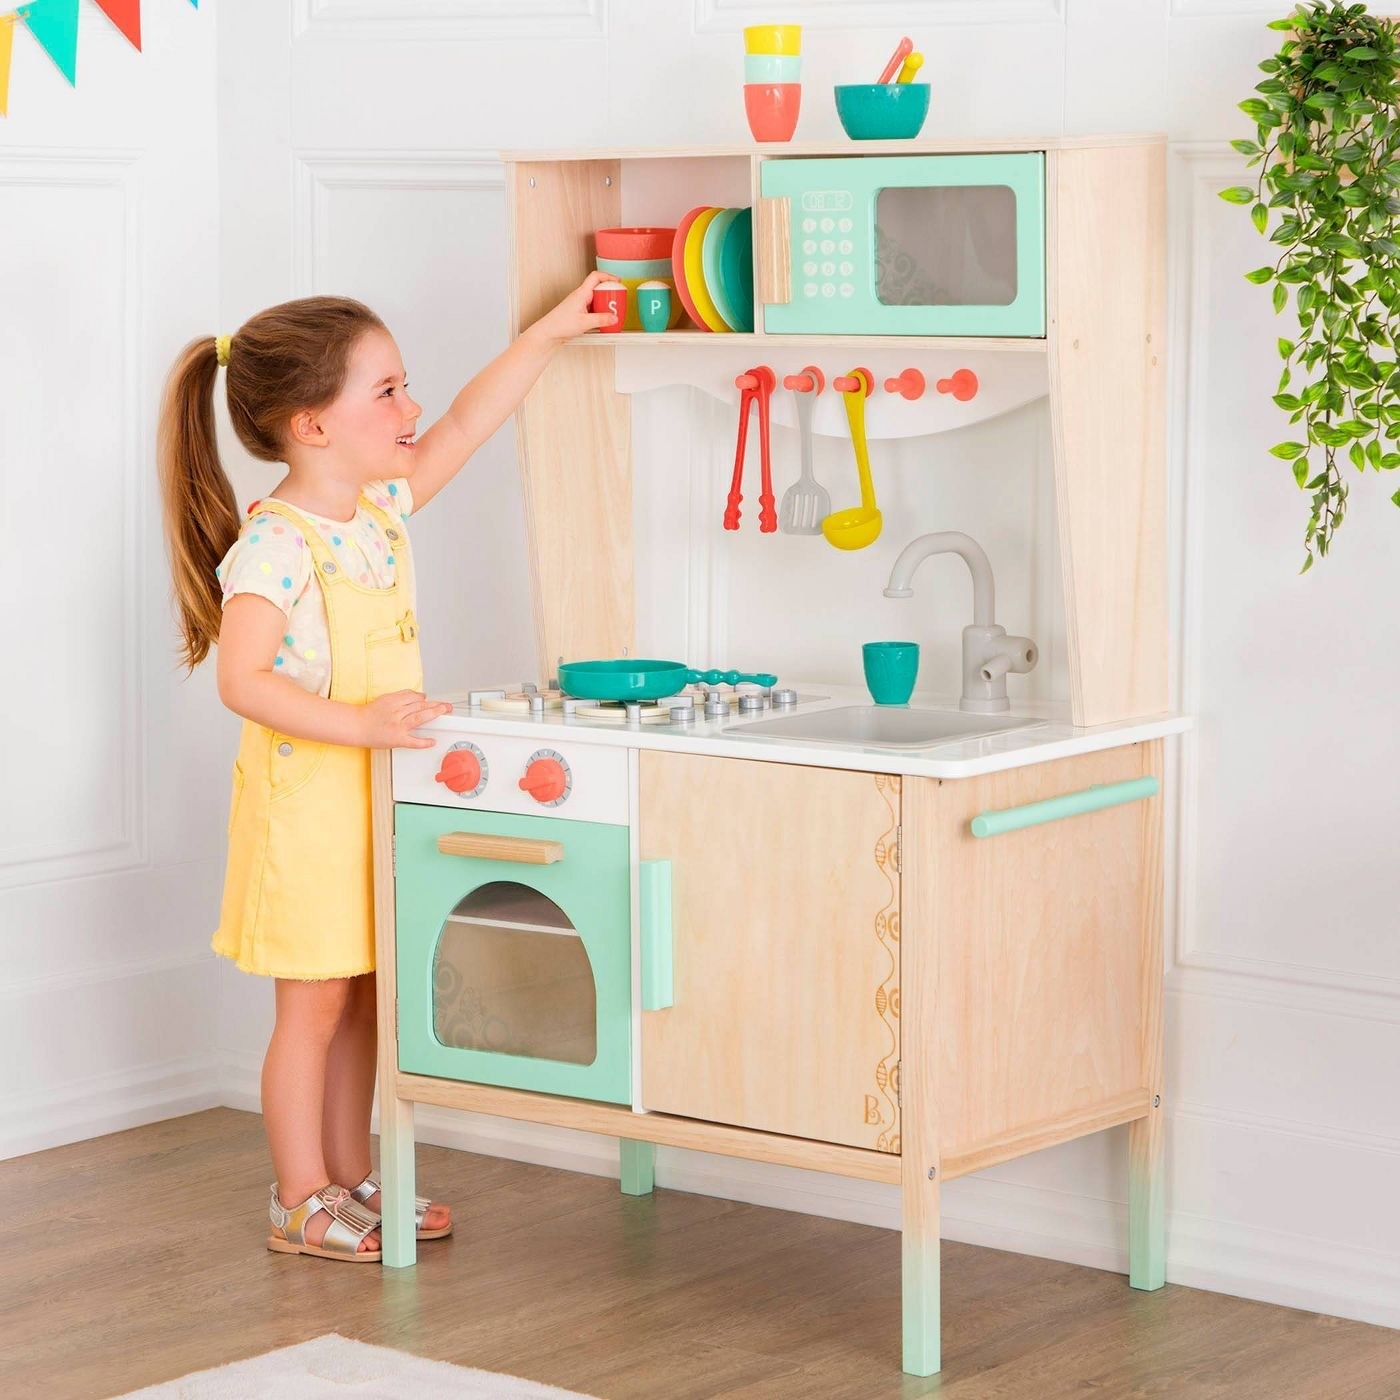 A kid that is playing with a wood kitchen